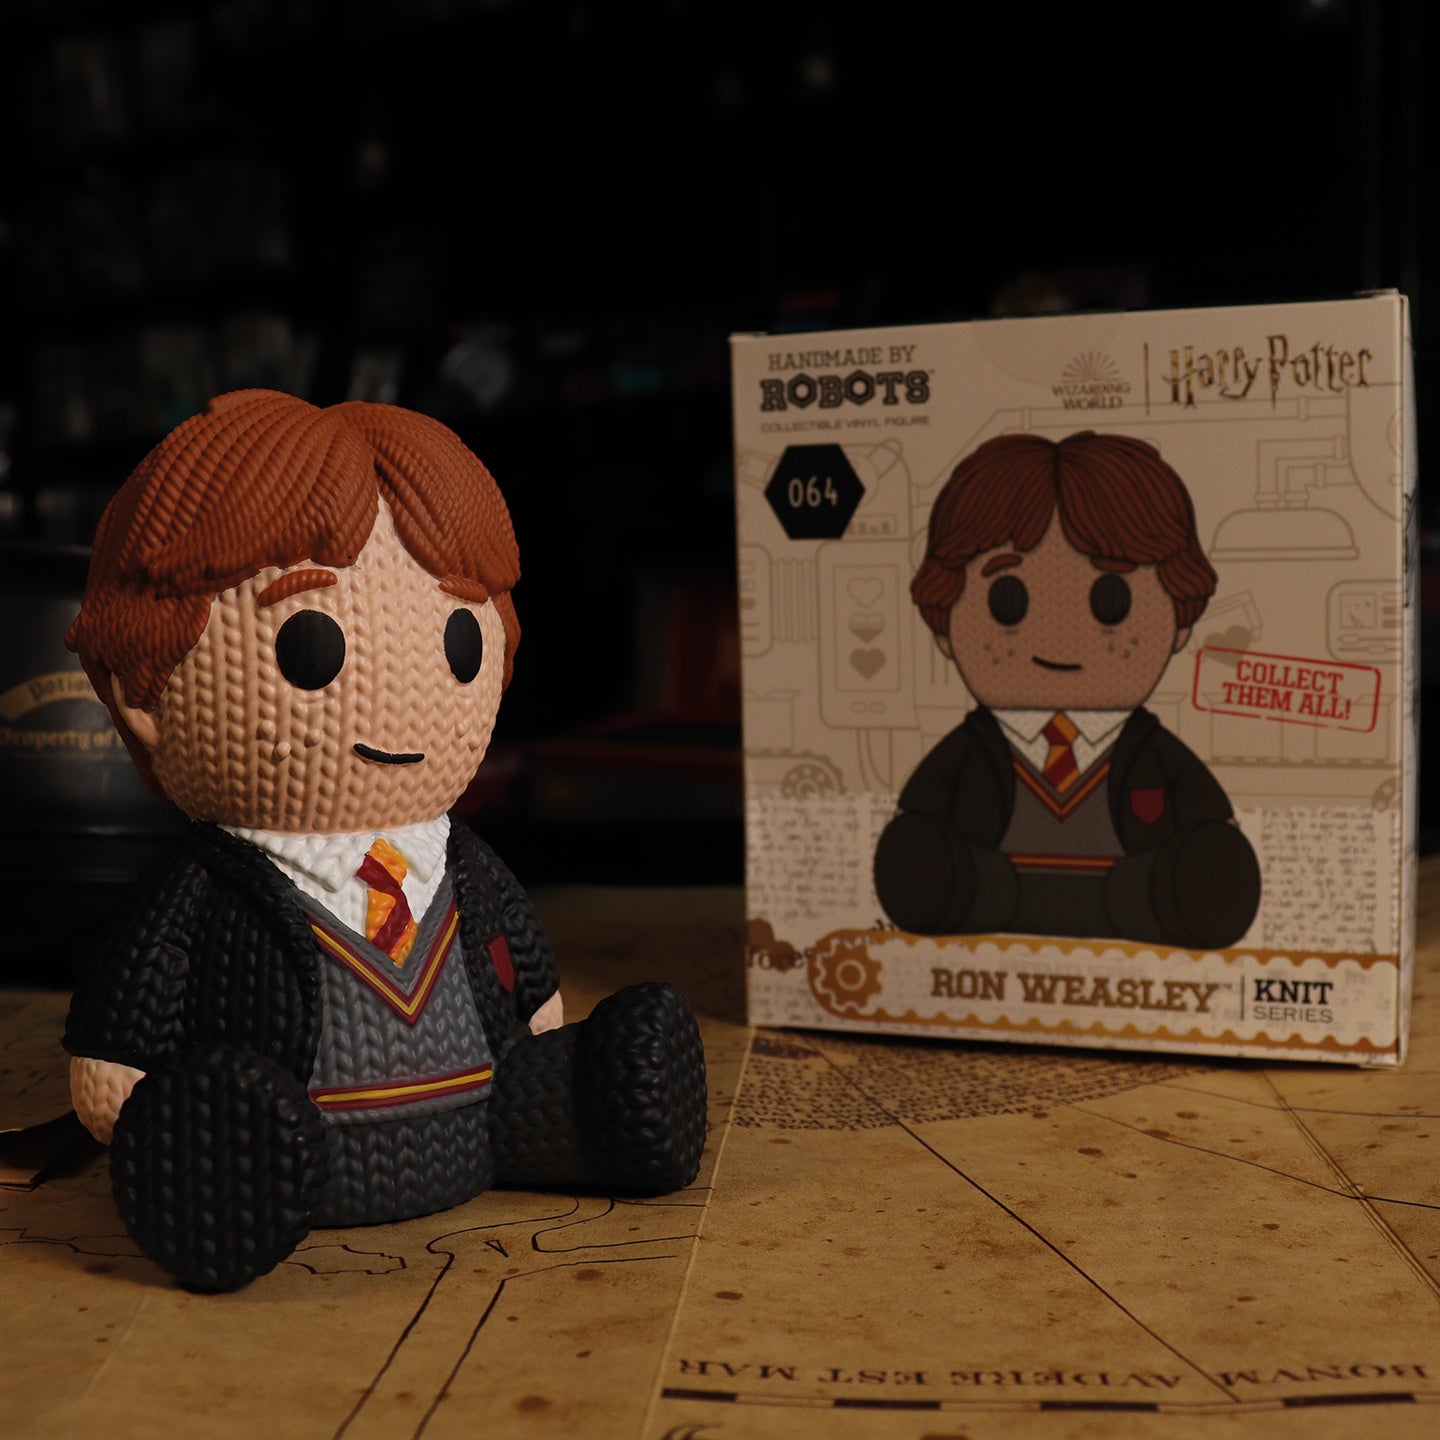 Harry Potter - Ron Weasley Collectible Vinyl Figure from Handmade By Robots